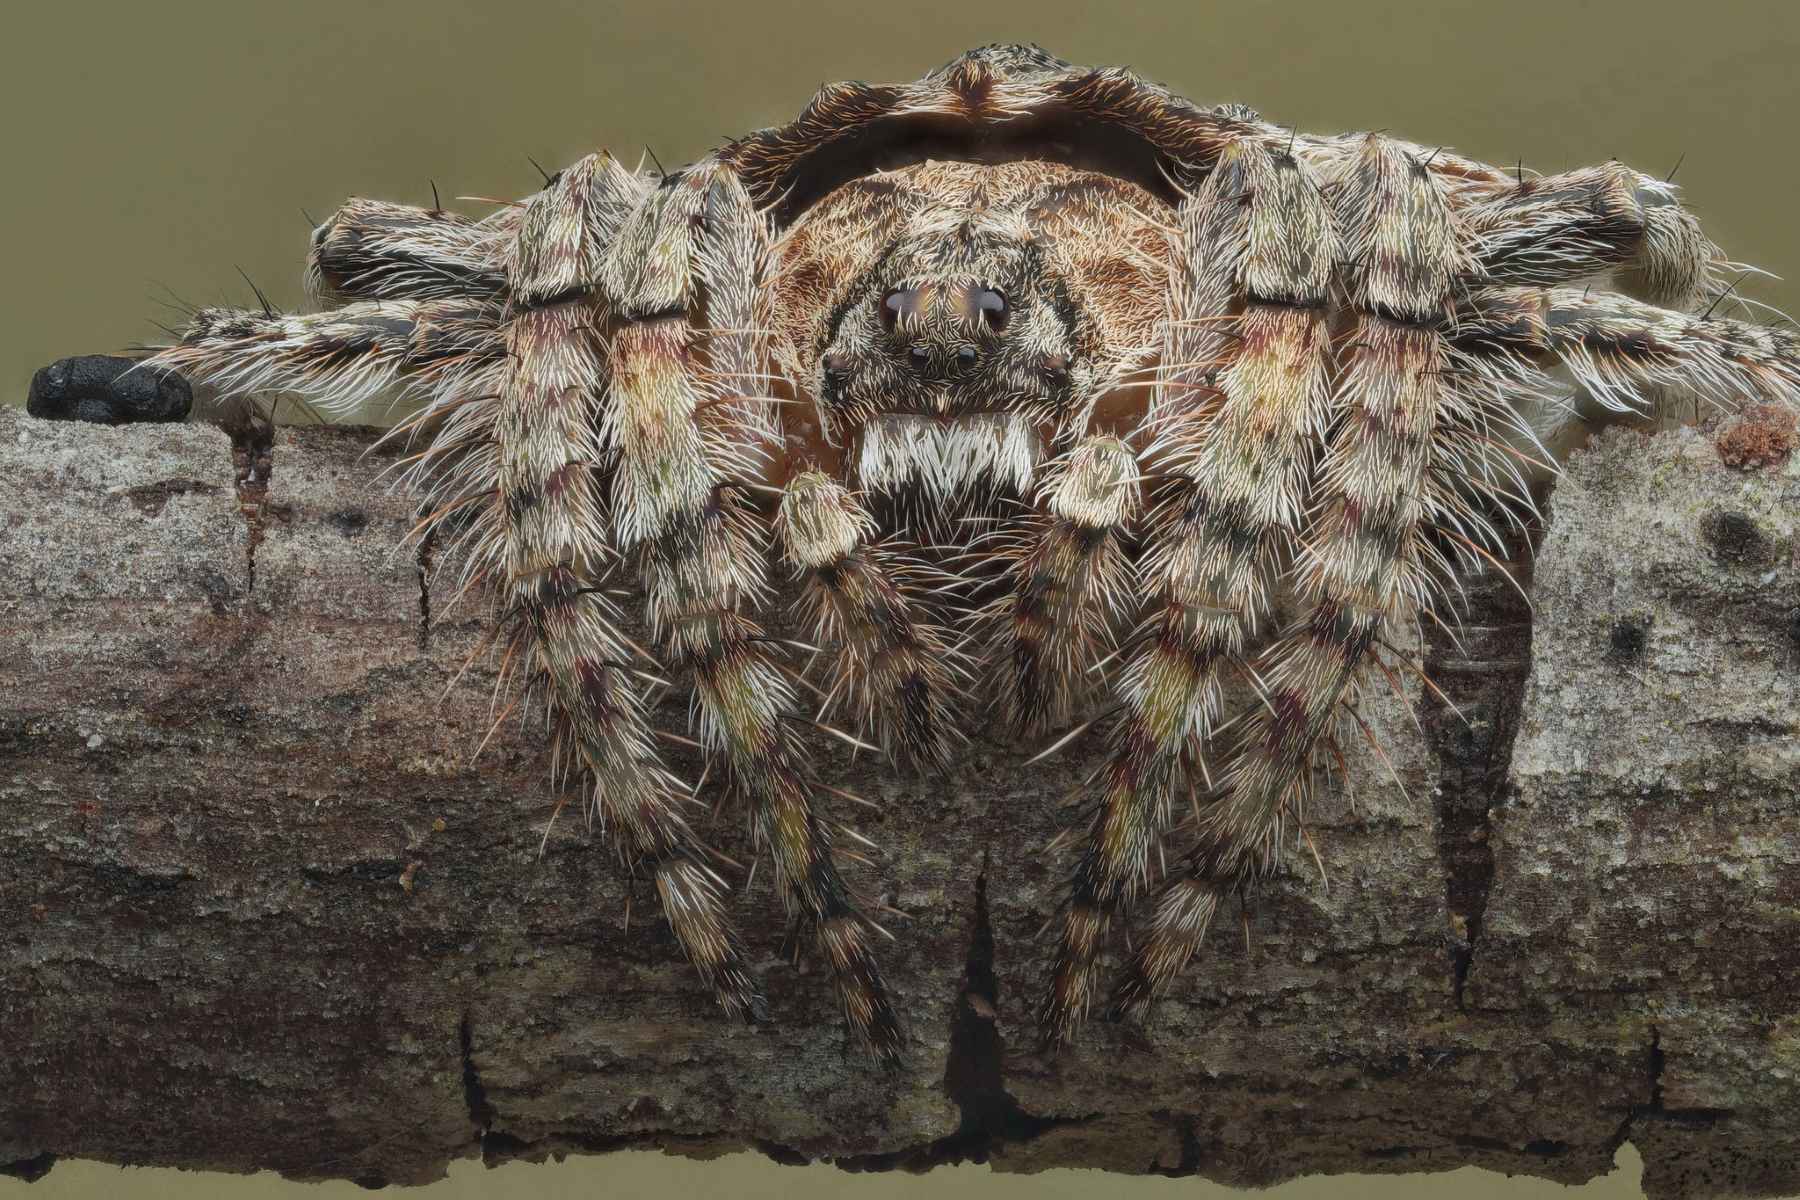 16 Captivating Facts About Wrap-around Spider 